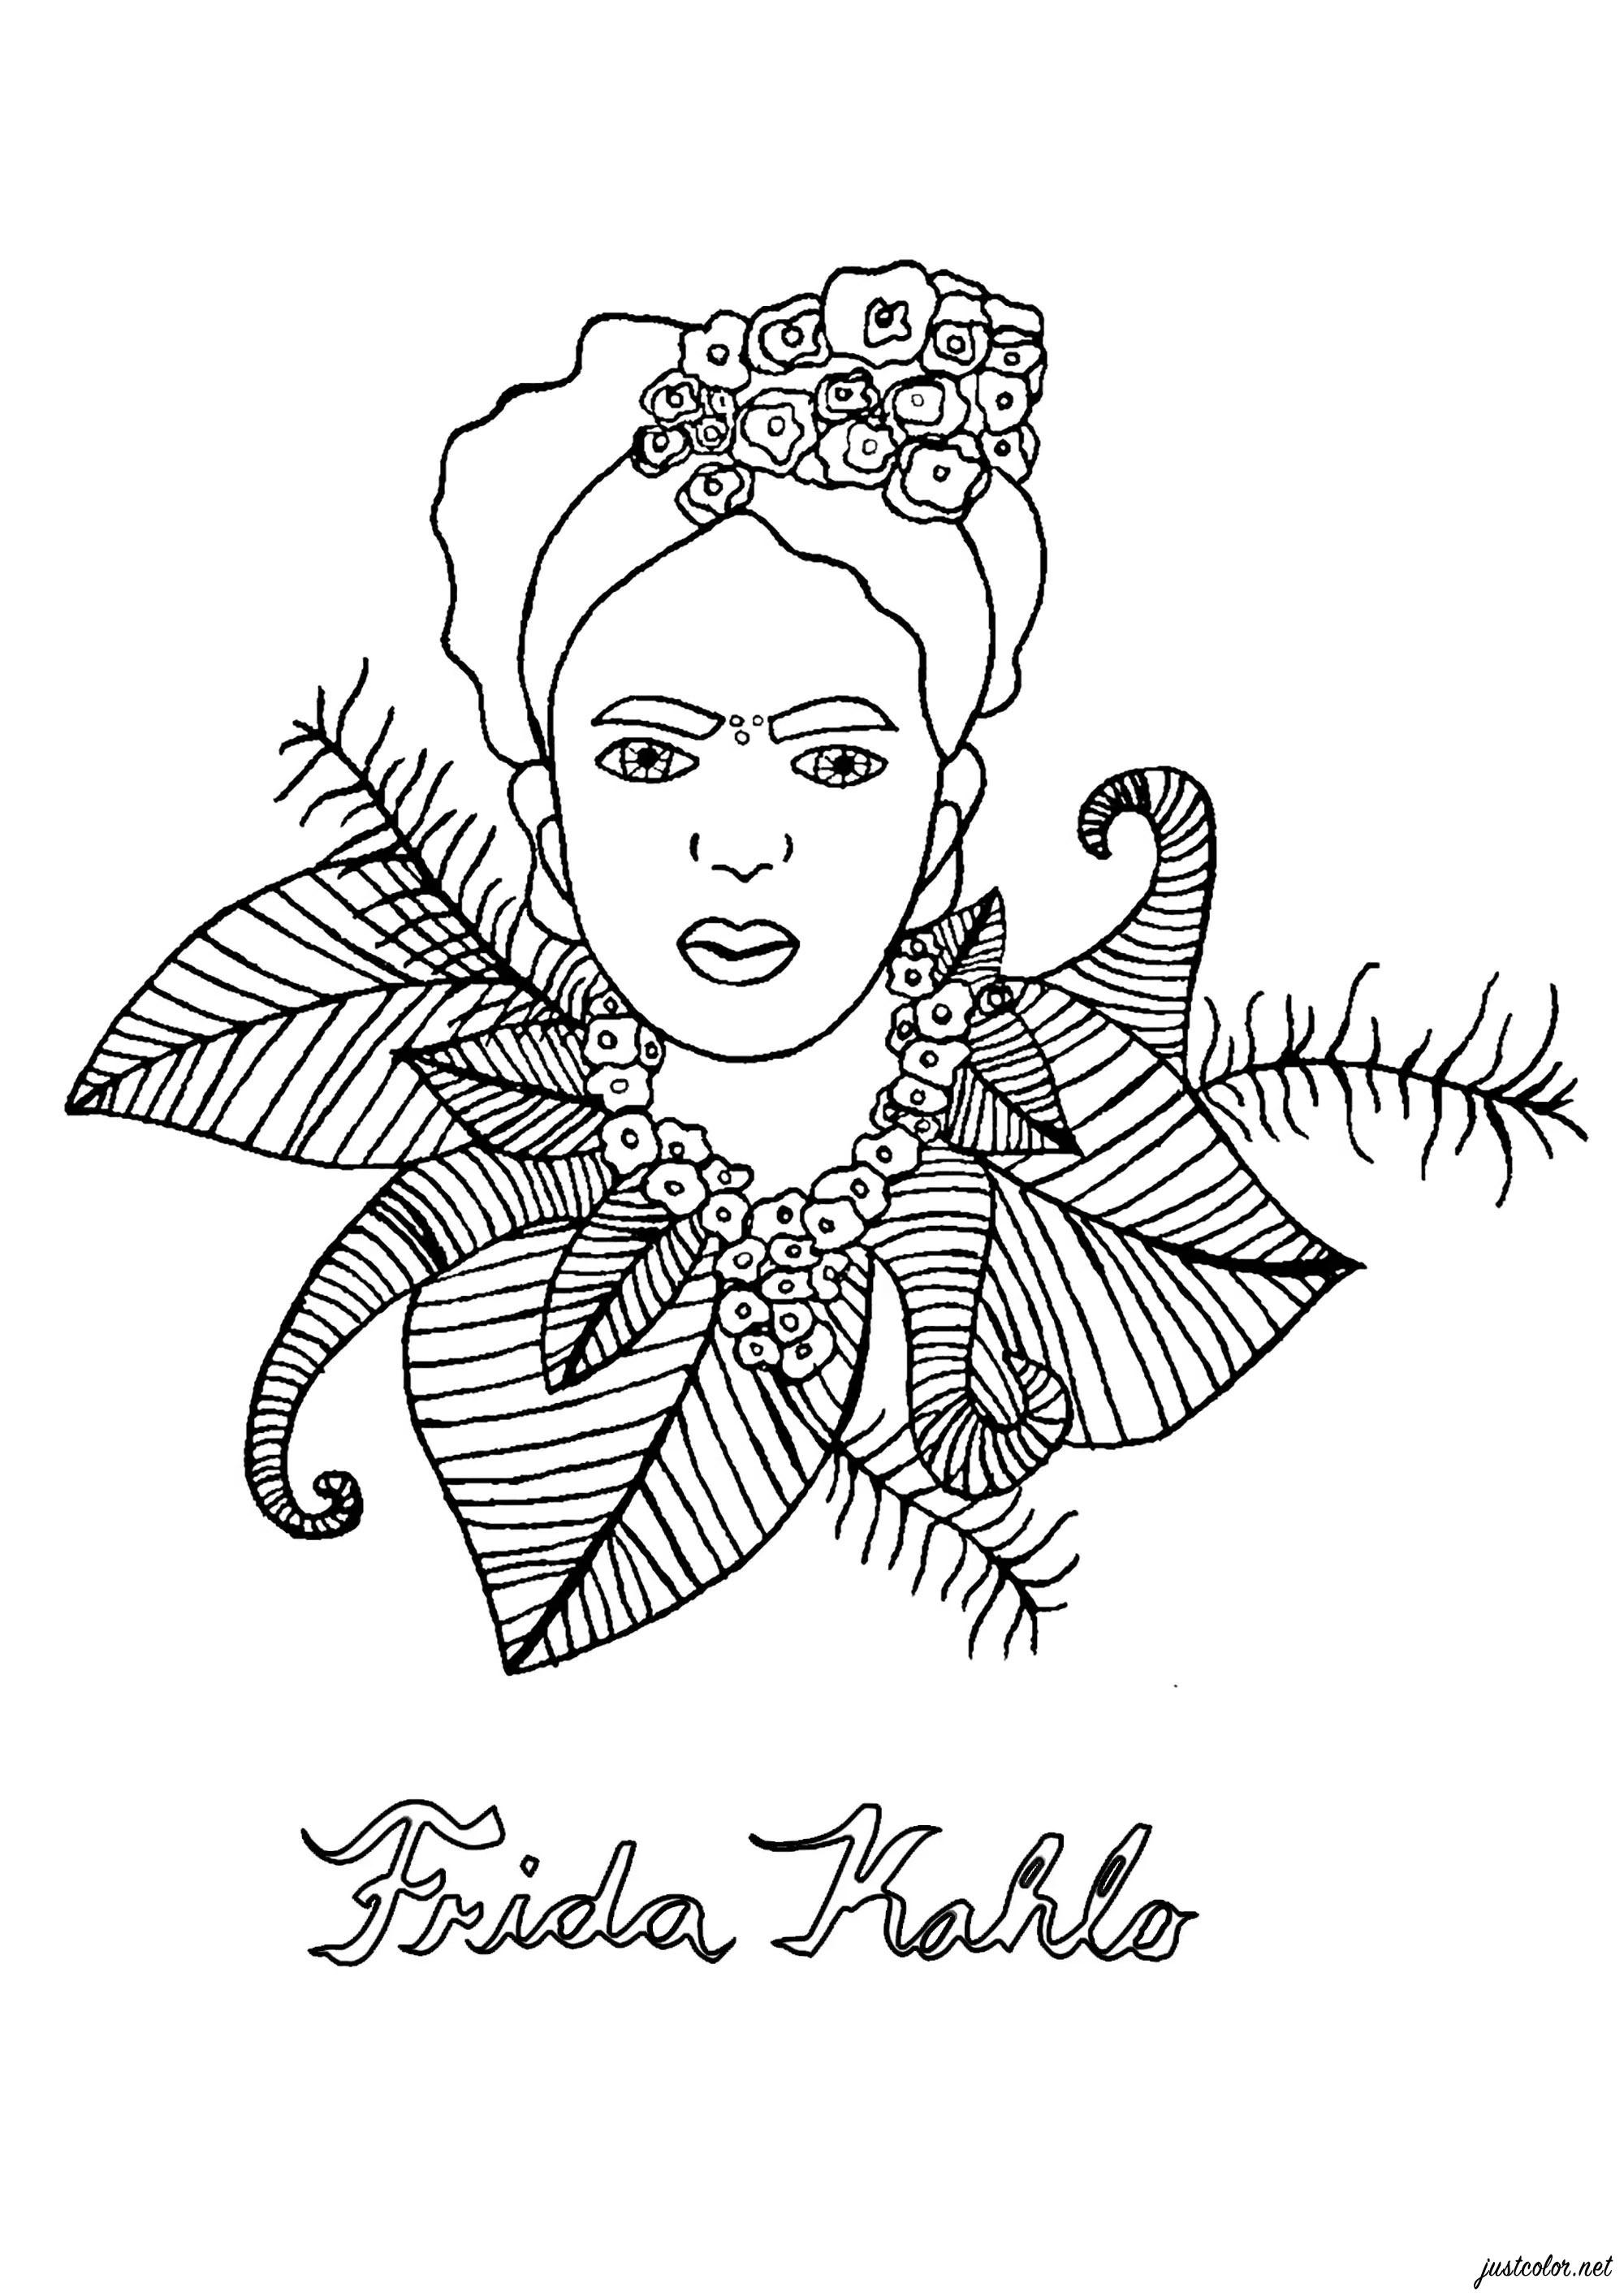 Colouring of Frida Kahlo's face surrounded by leaves. This coloring page is perfect for children who love drawing and Mexican culture. It's a portrait of the famous artist Frida Kahlo, surrounded by leaves that we recommend you color in an intense, bright green.